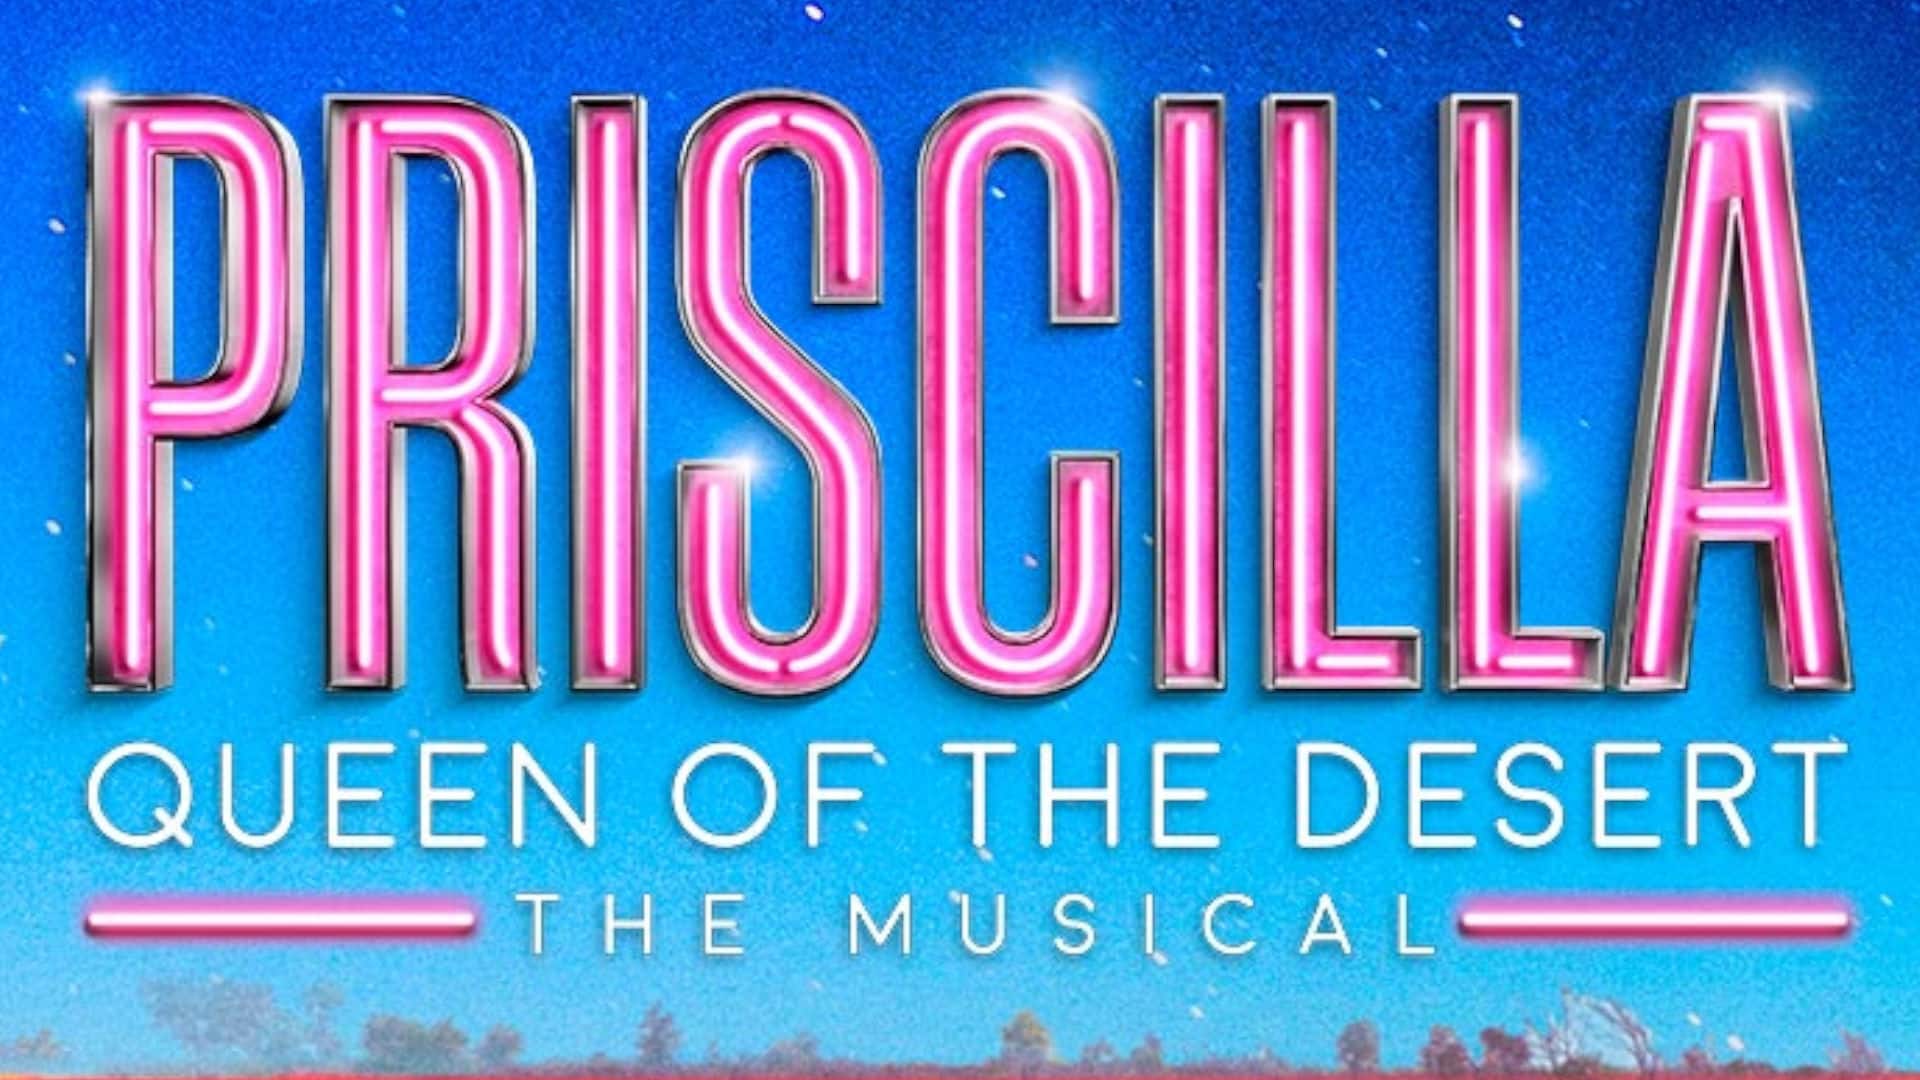 Priscilla Queen Of The Desert musical 2021 tour tickets, dates and venues -  book now - Stage Chat